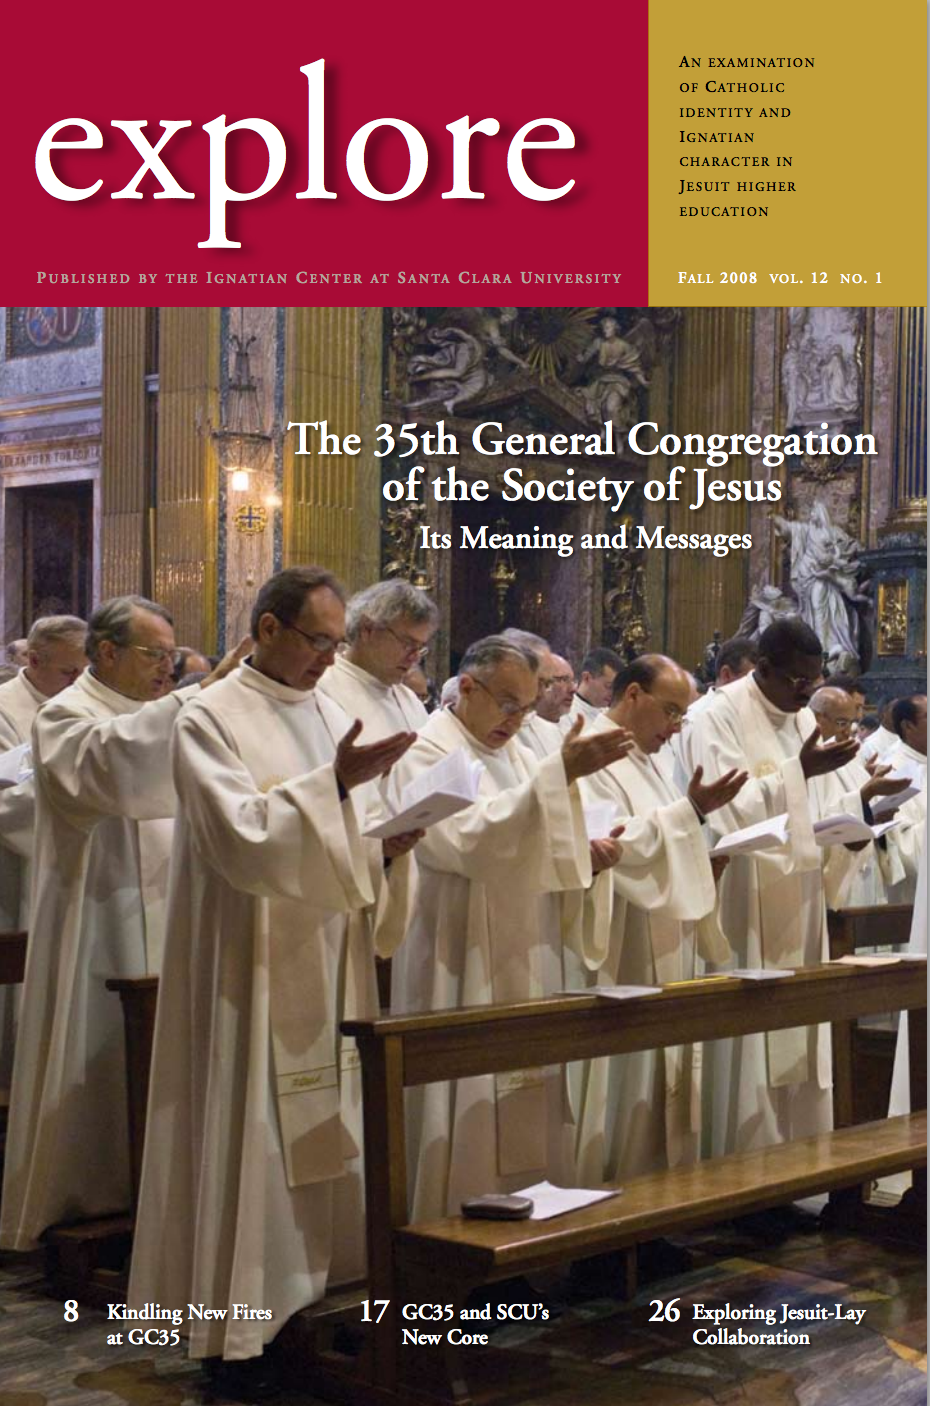 Cover of 'Explore' magazine, Fall 2008, showing clergy in white robes inside a church.